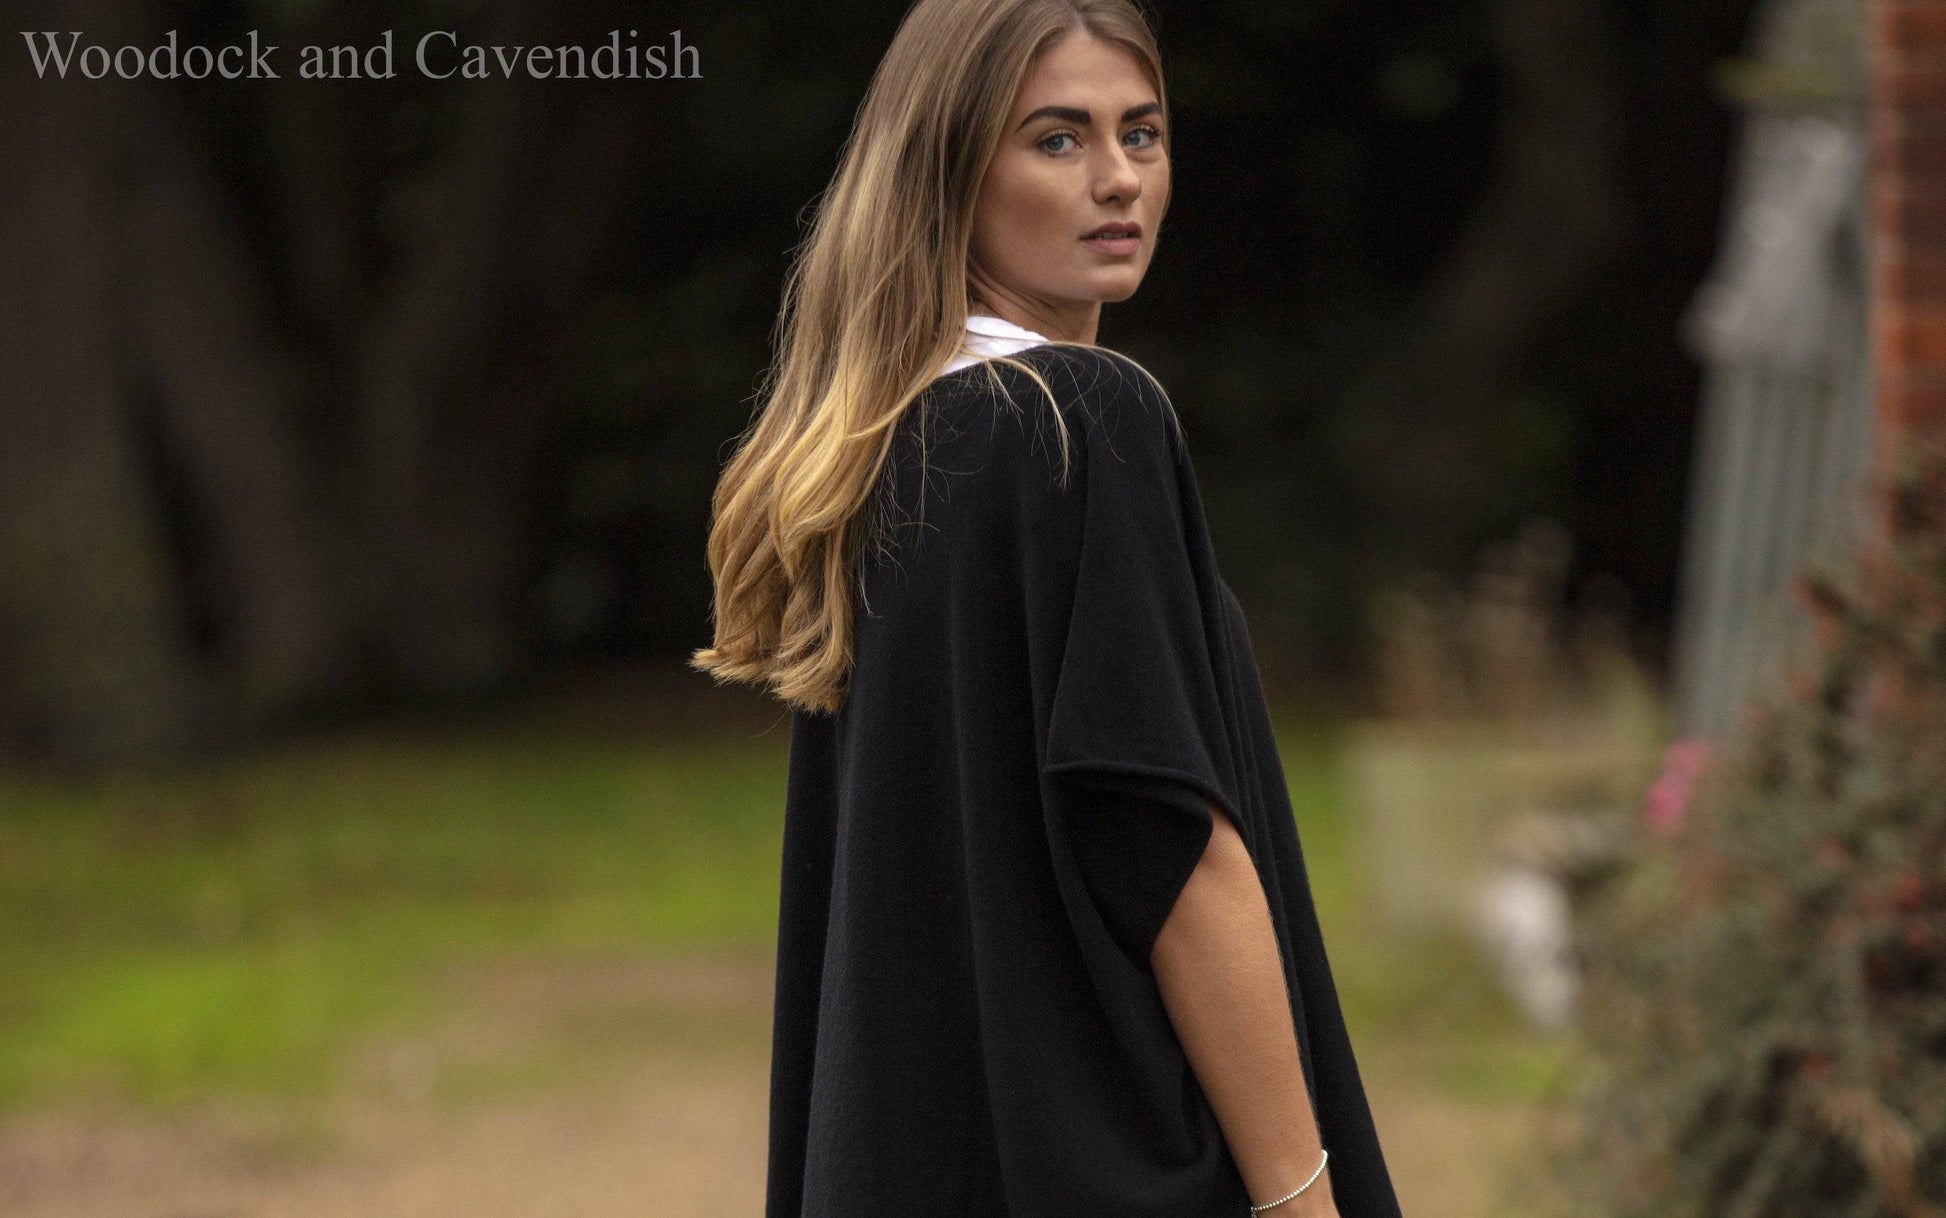 Cashmere & Merino Wool Boat Neck Poncho in Black By Woodcock & Cavendish for sale - Woodcock and Cavendish